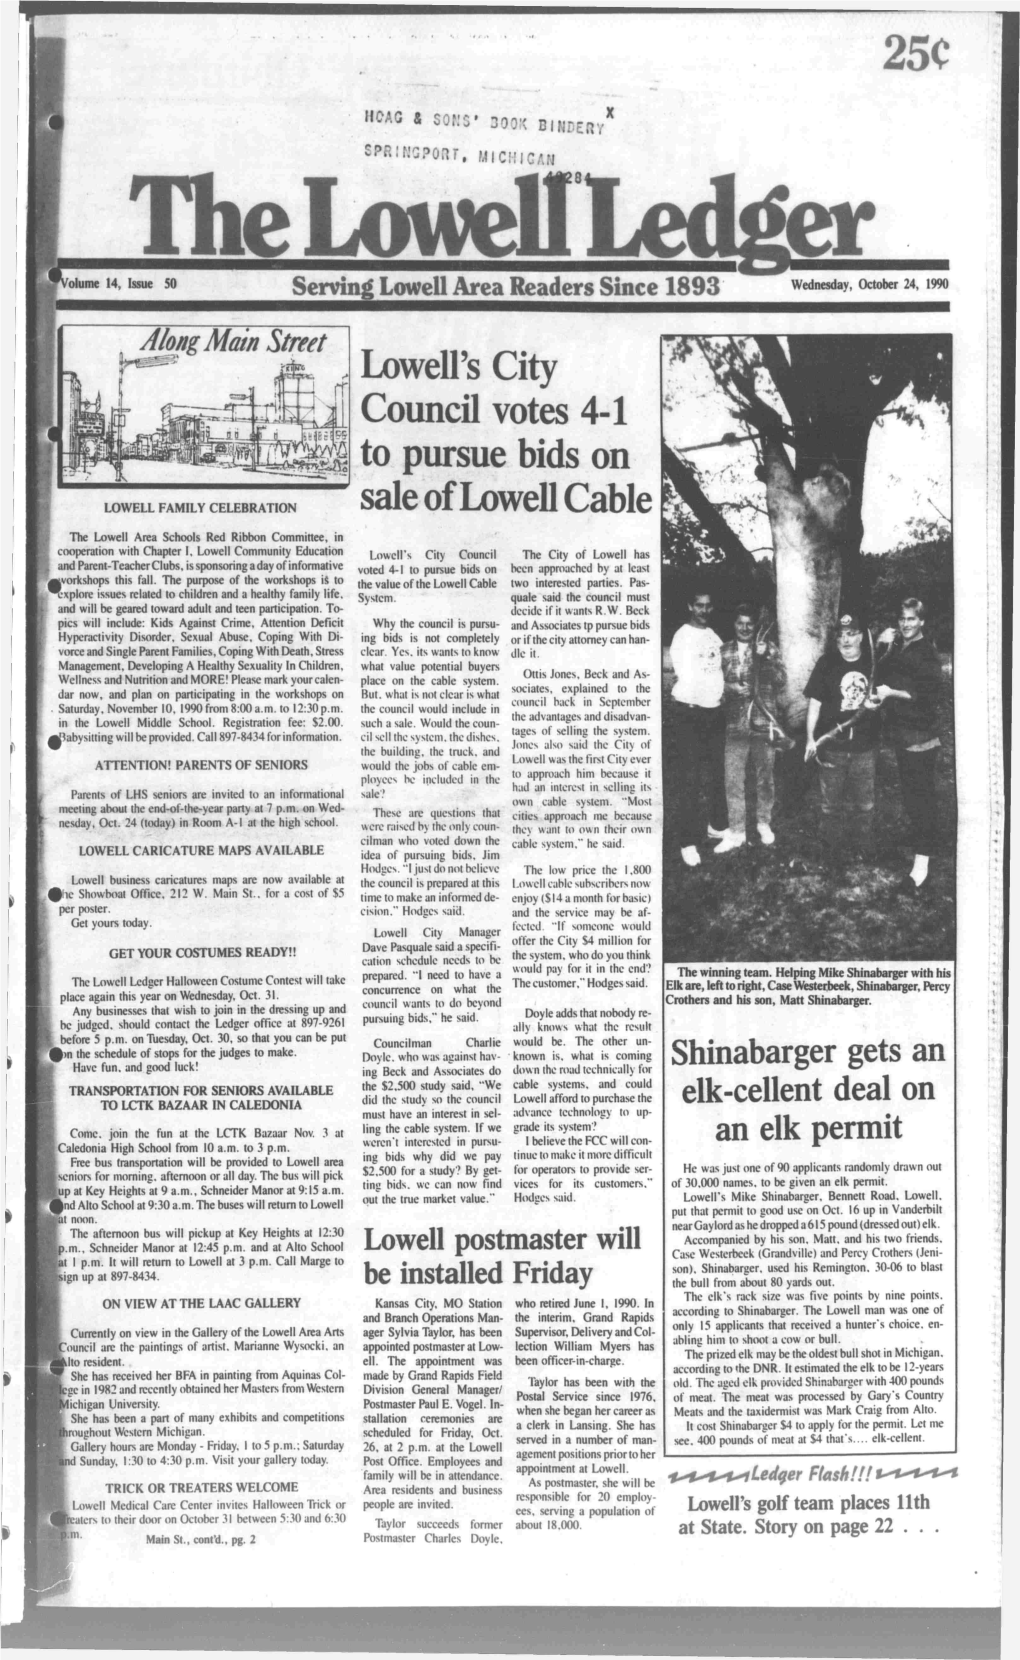 Lowell's City Council Votes 4-1 to Pursue Bids on Sale of Lowell Cable